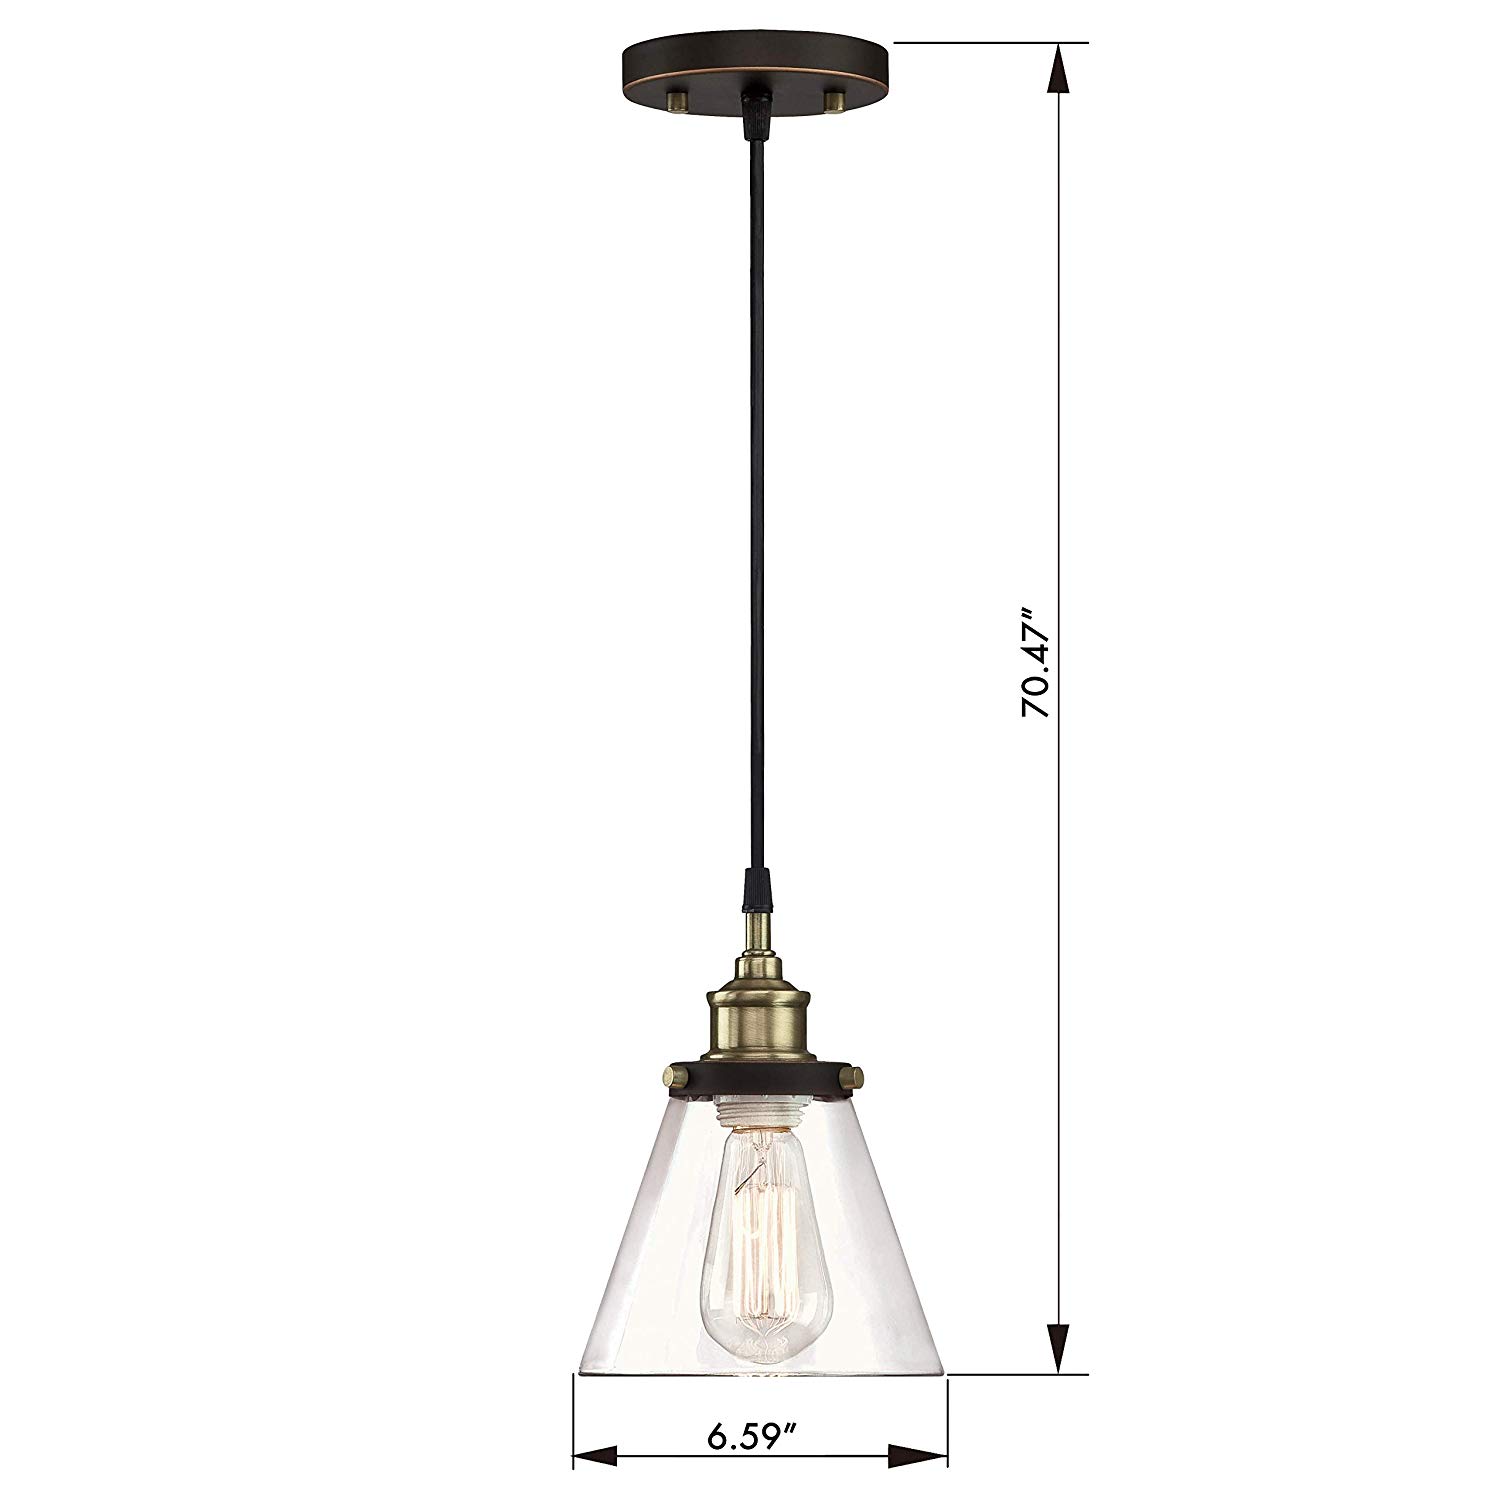 GRUENLICH Pendant Lighting Fixture for Kitchen and Dining Room, Hanging Lighting Fixture, E26 Medium Base, Metal Construction with Clear Glass, Bulb not Included, 2-Pack